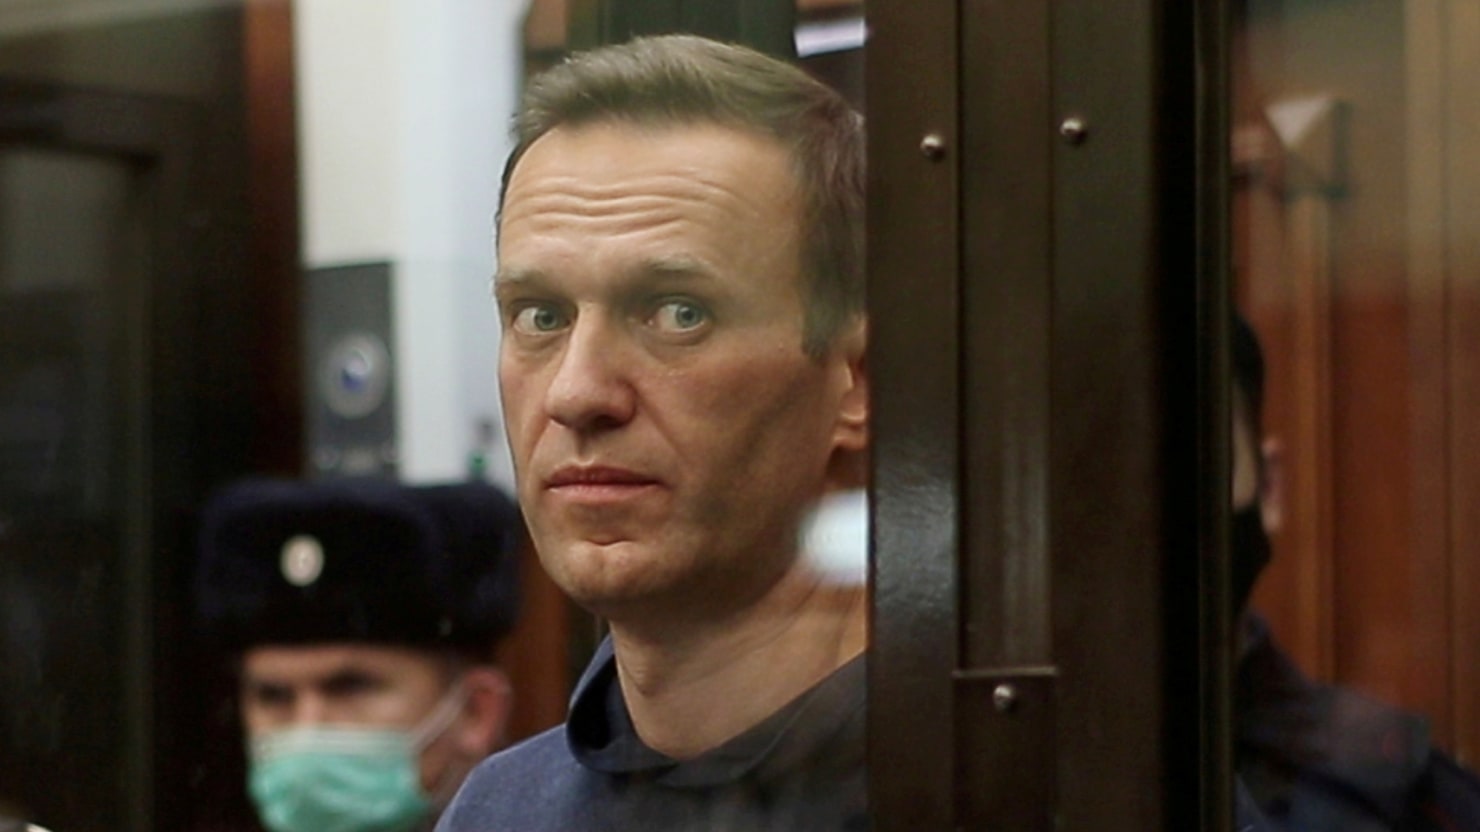 Russian opposition leader Alexei Navalny sent to infamous prison camp